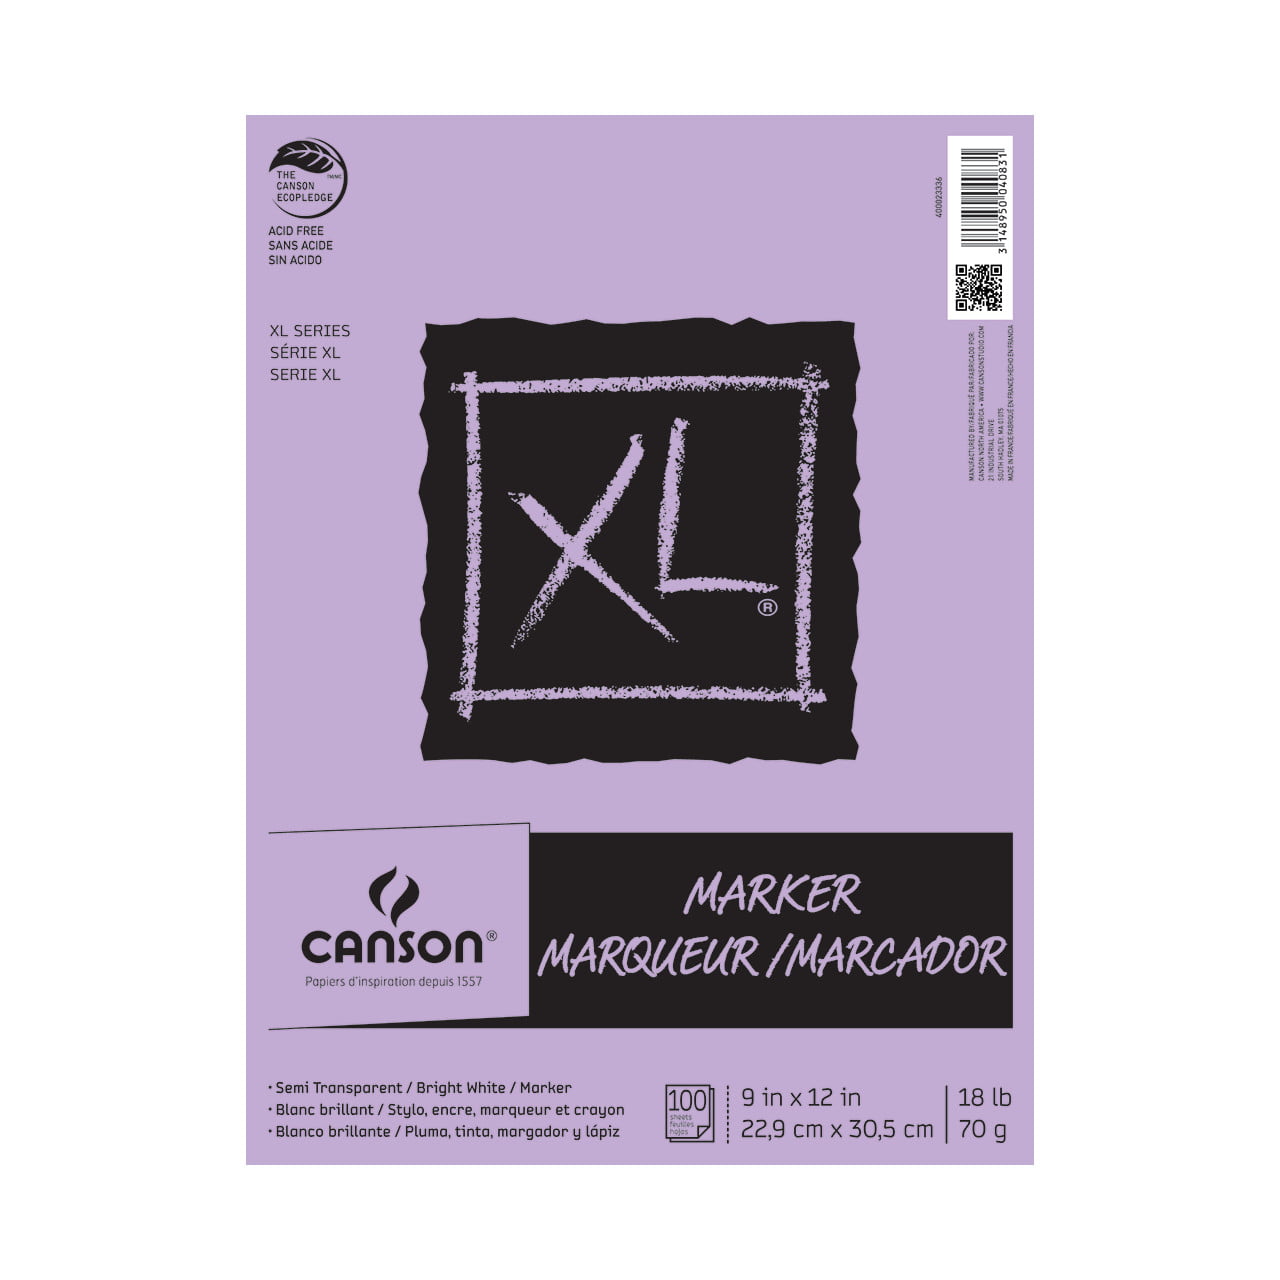 Canson Marker Paper Review — SamBeAwesome